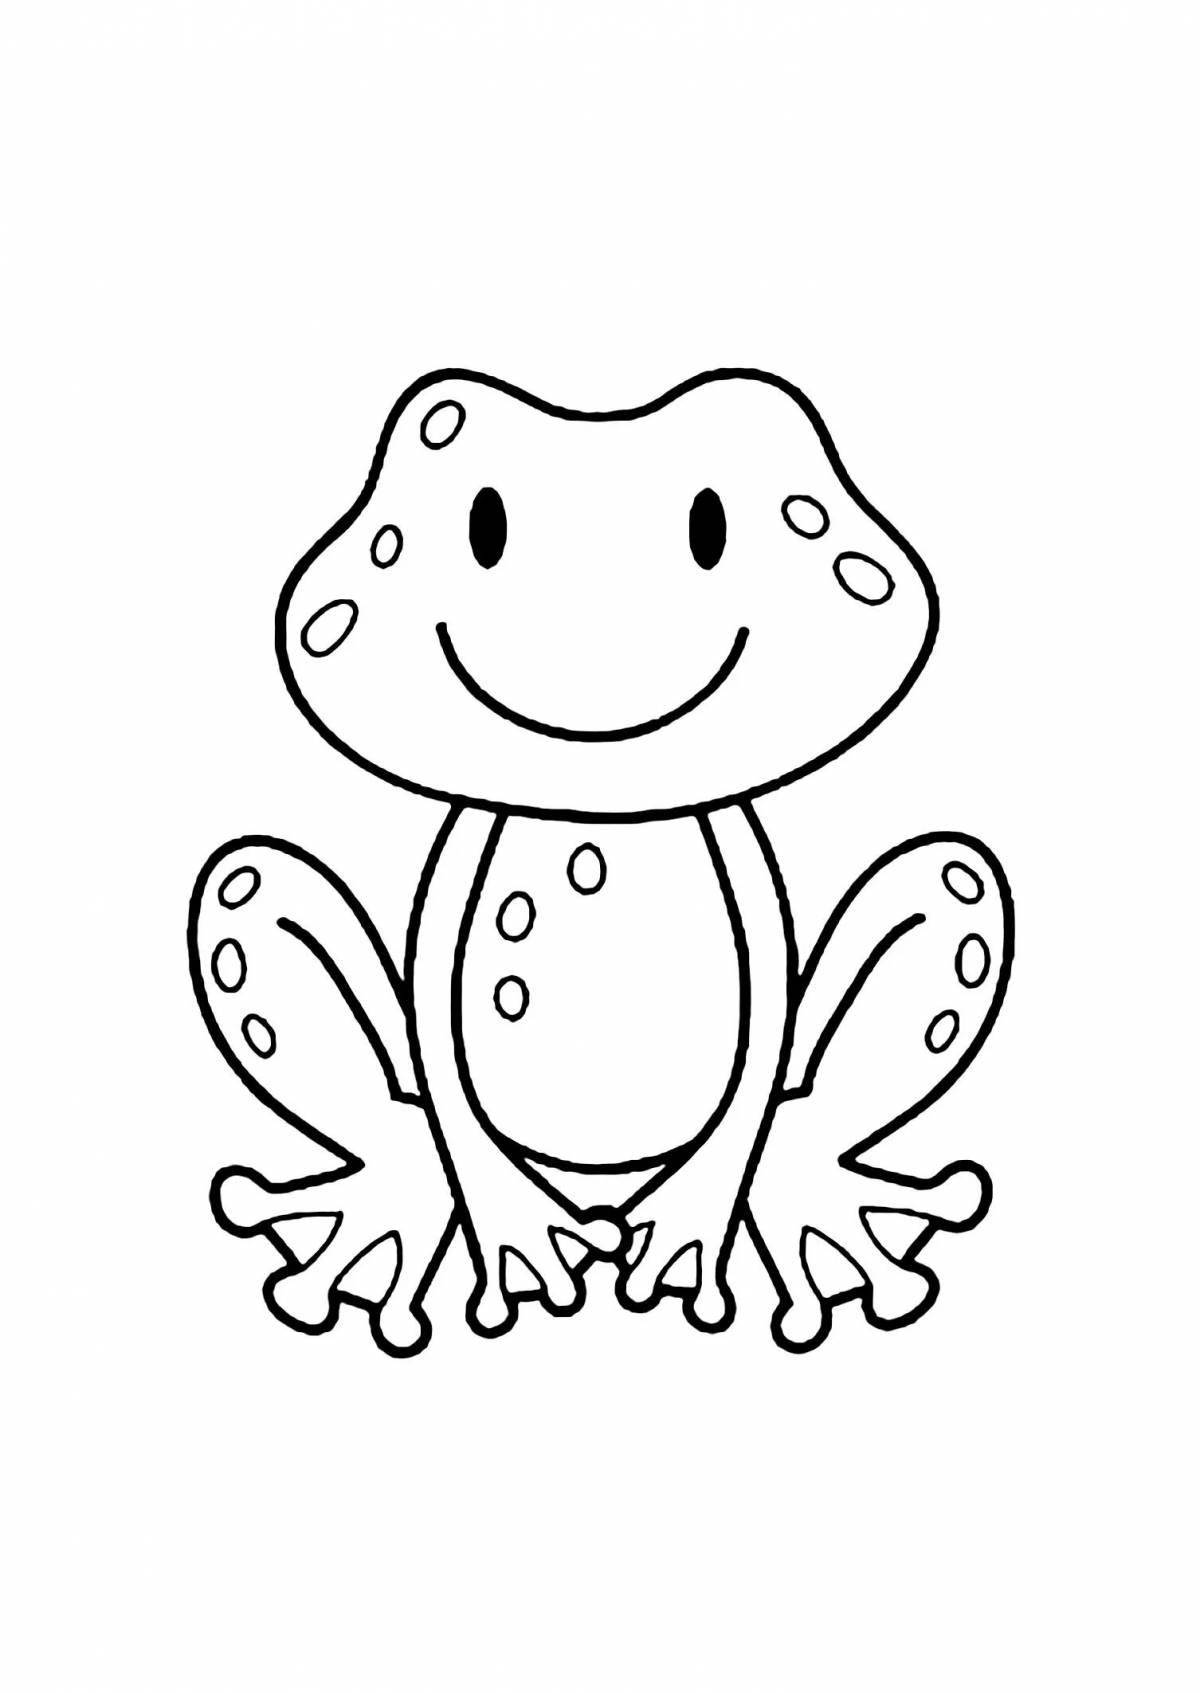 Cheerful frog coloring pages